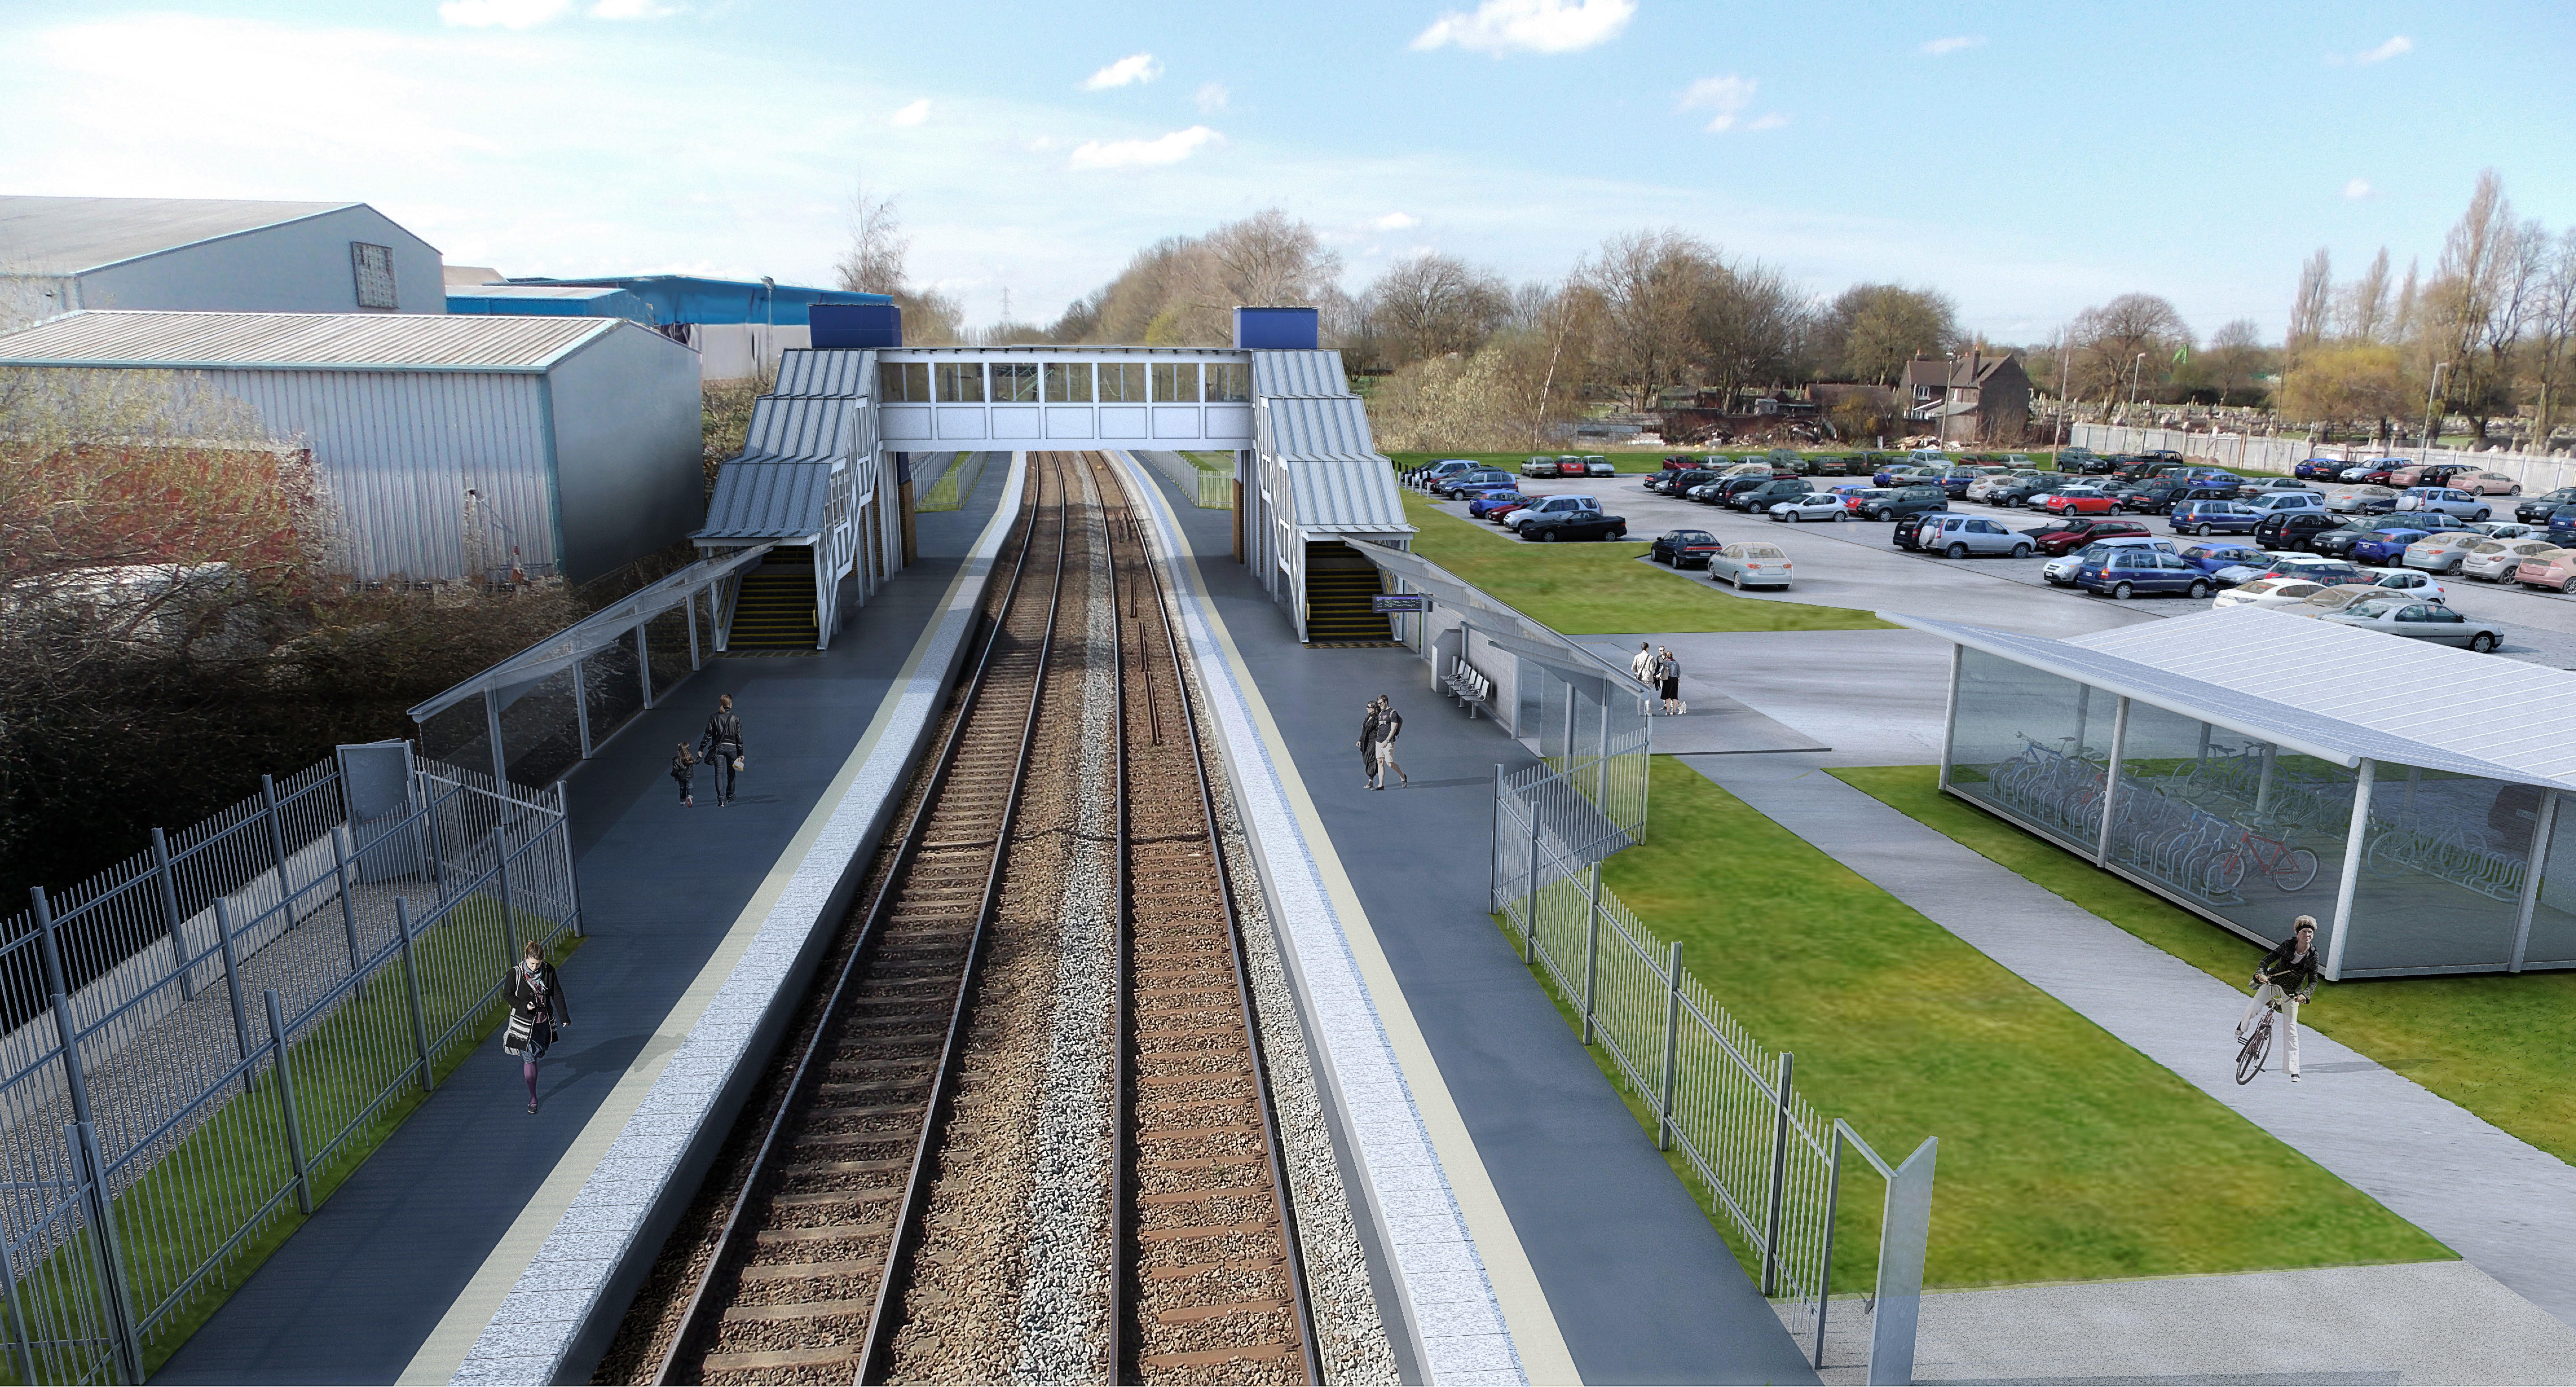 Planning permission granted for two new Black Country railway stations